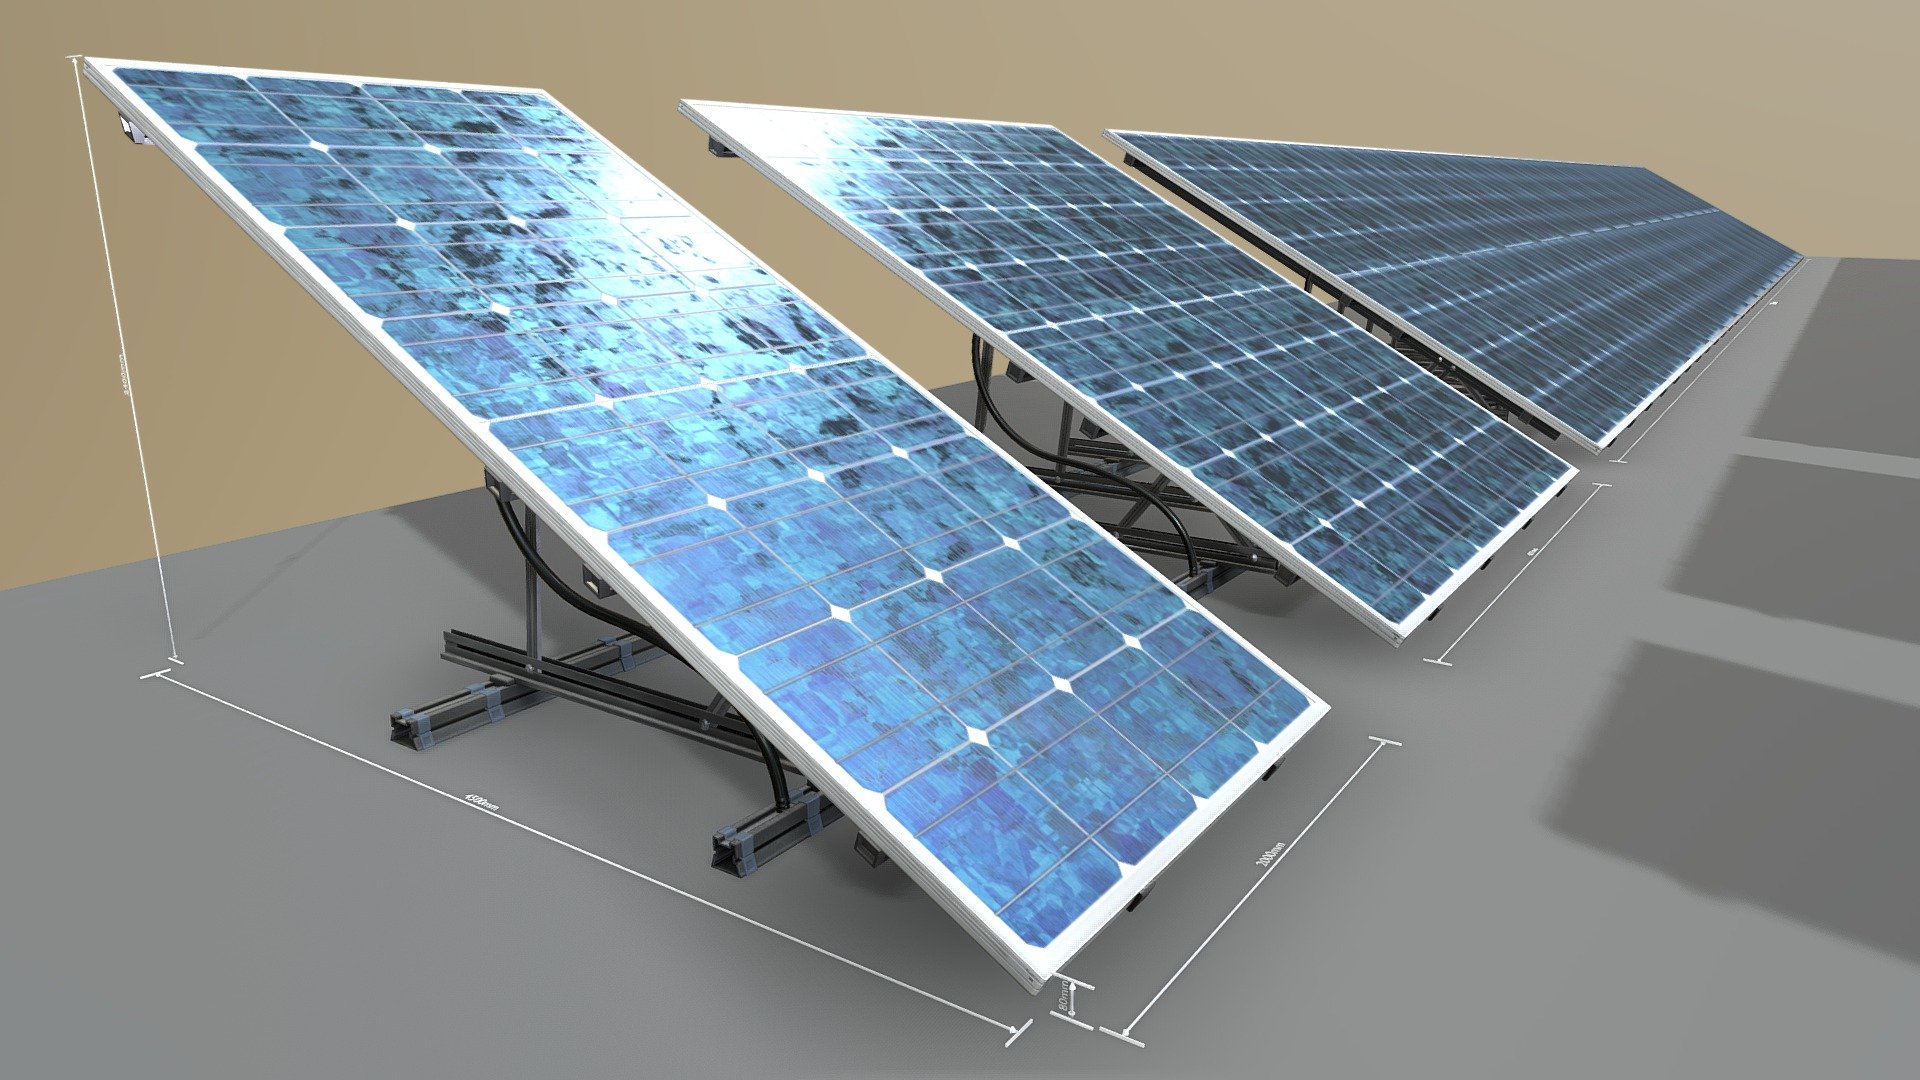 Here are some new versions for the rigged solar panels.





Parts:




Object - 1_solar_panels_2m 

2.121m x 4.854m x 0.683m

Polygons = 6082






Object - 1_solar_panels_4m 

4.124m x 4.854m x 0.683m

Polygons = 11302






Object - 1_solar_panels_32m 

31.998m x 4.854m x 0.683m

Polygons = 84382






Object - 2_solar_panels_2m 

2.121m x 4.633m x 1.872m

Polygons = 6082






Object - 2_solar_panels_4m 

4.124m x 4.633m x 1.872m

Polygons = 11302






Object - 2_solar_panels_32m 

31.998m x 4.633m x 1.872m

Polygons = 84382






Object - 3_solar_panels_2m 

2.121m x 4.277m x 2.437m

Polygons = 6082






Object - 3_solar_panels_4m 

4.124m x 4.277m x 2.437m

Polygons = 11302






Object - 3_solar_panels_32m 

31.998m x 4.277m x 2.437m

Polygons = 84382


 - New Solar Panels (Rigged) - Buy Royalty Free 3D model by VIS-All-3D (@VIS-All) 3d model